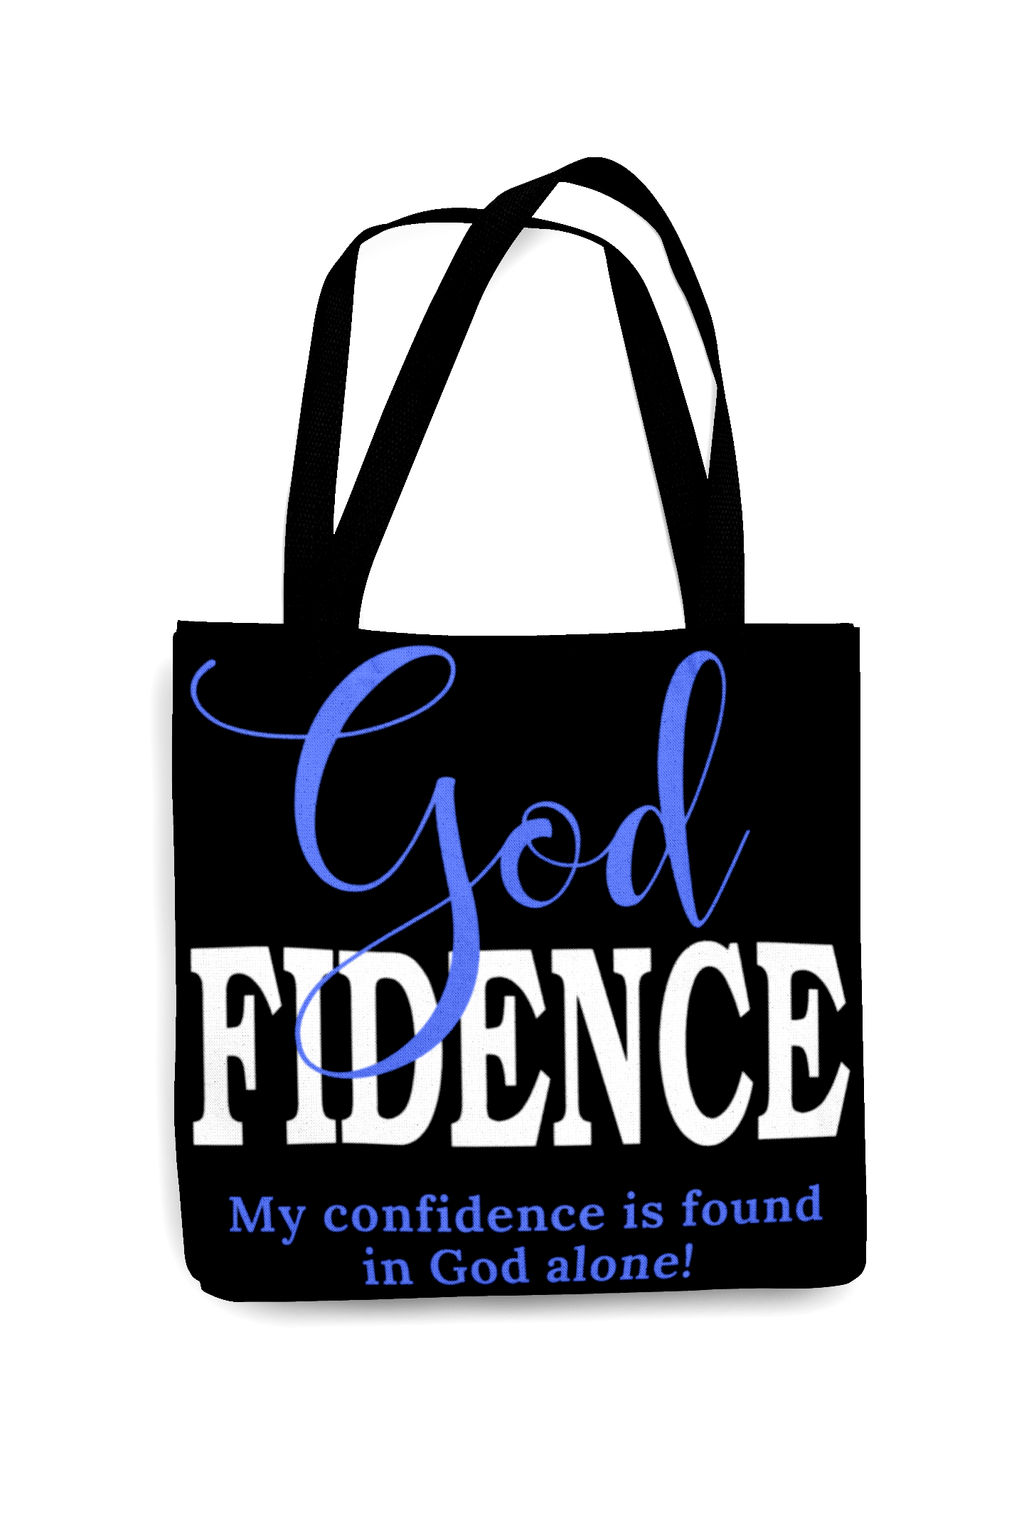 Godfidence Edition 2 Tote